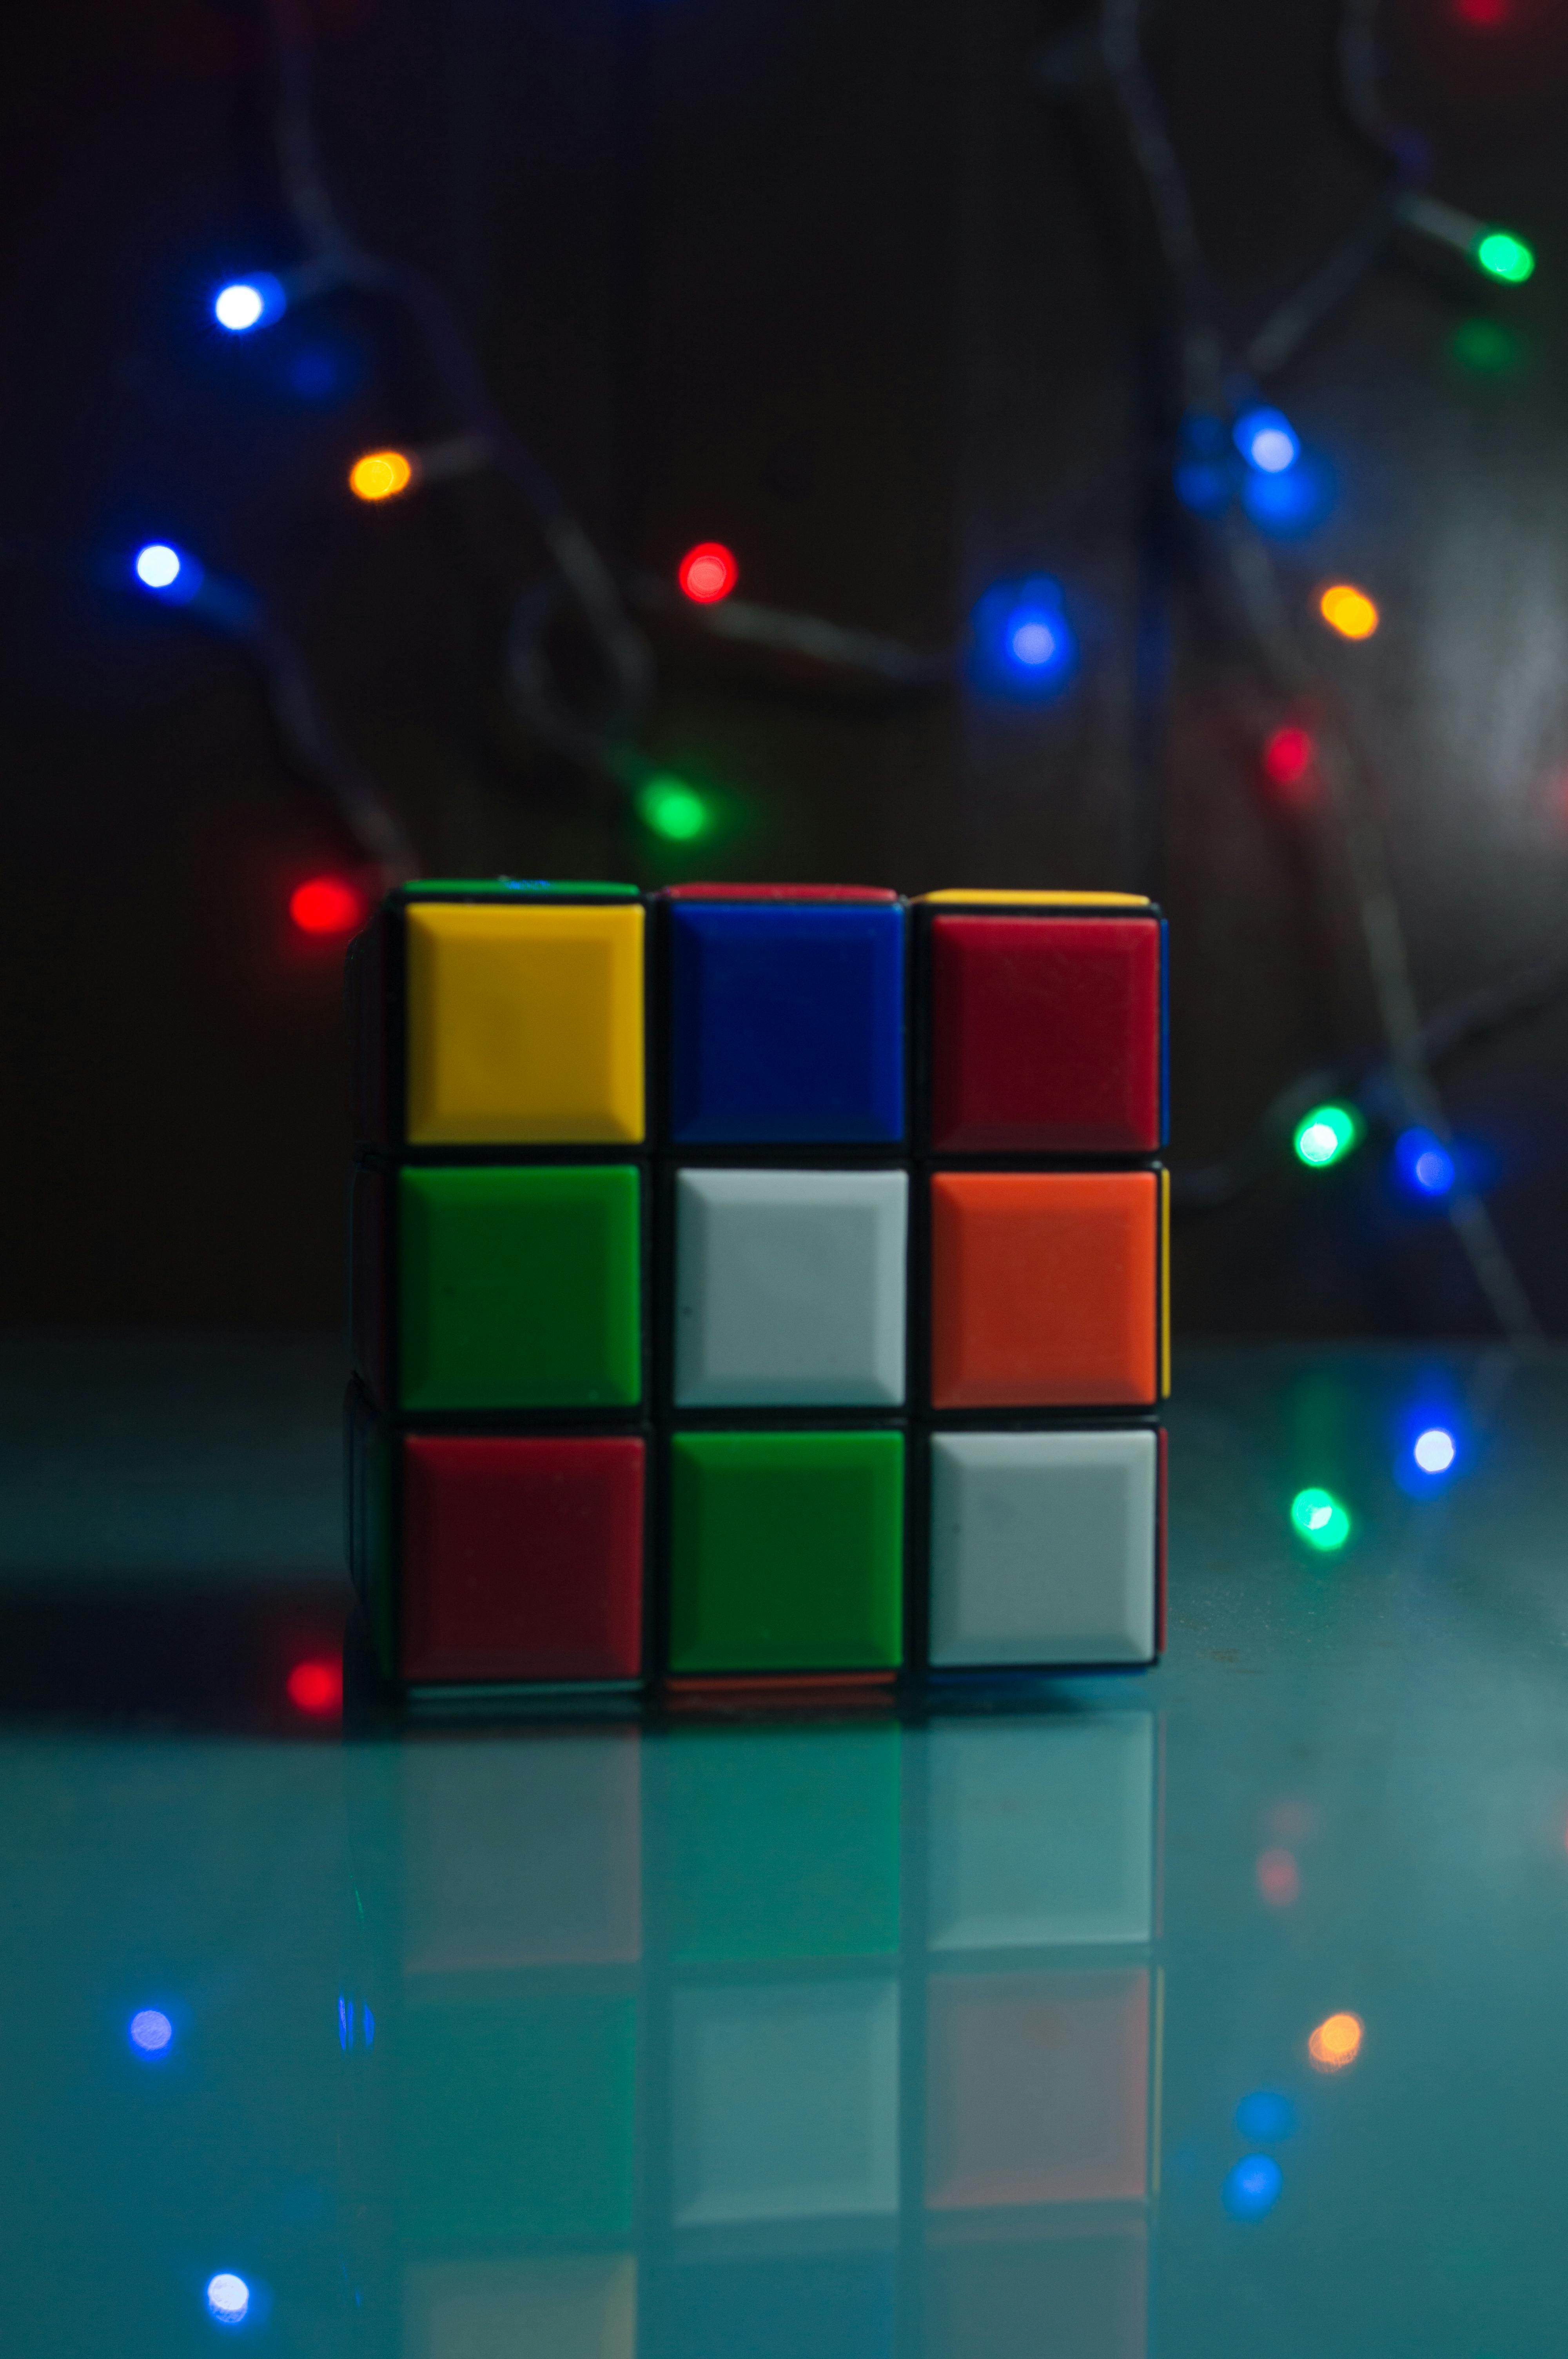 Cube Photos Download The BEST Free Cube Stock Photos  HD Images